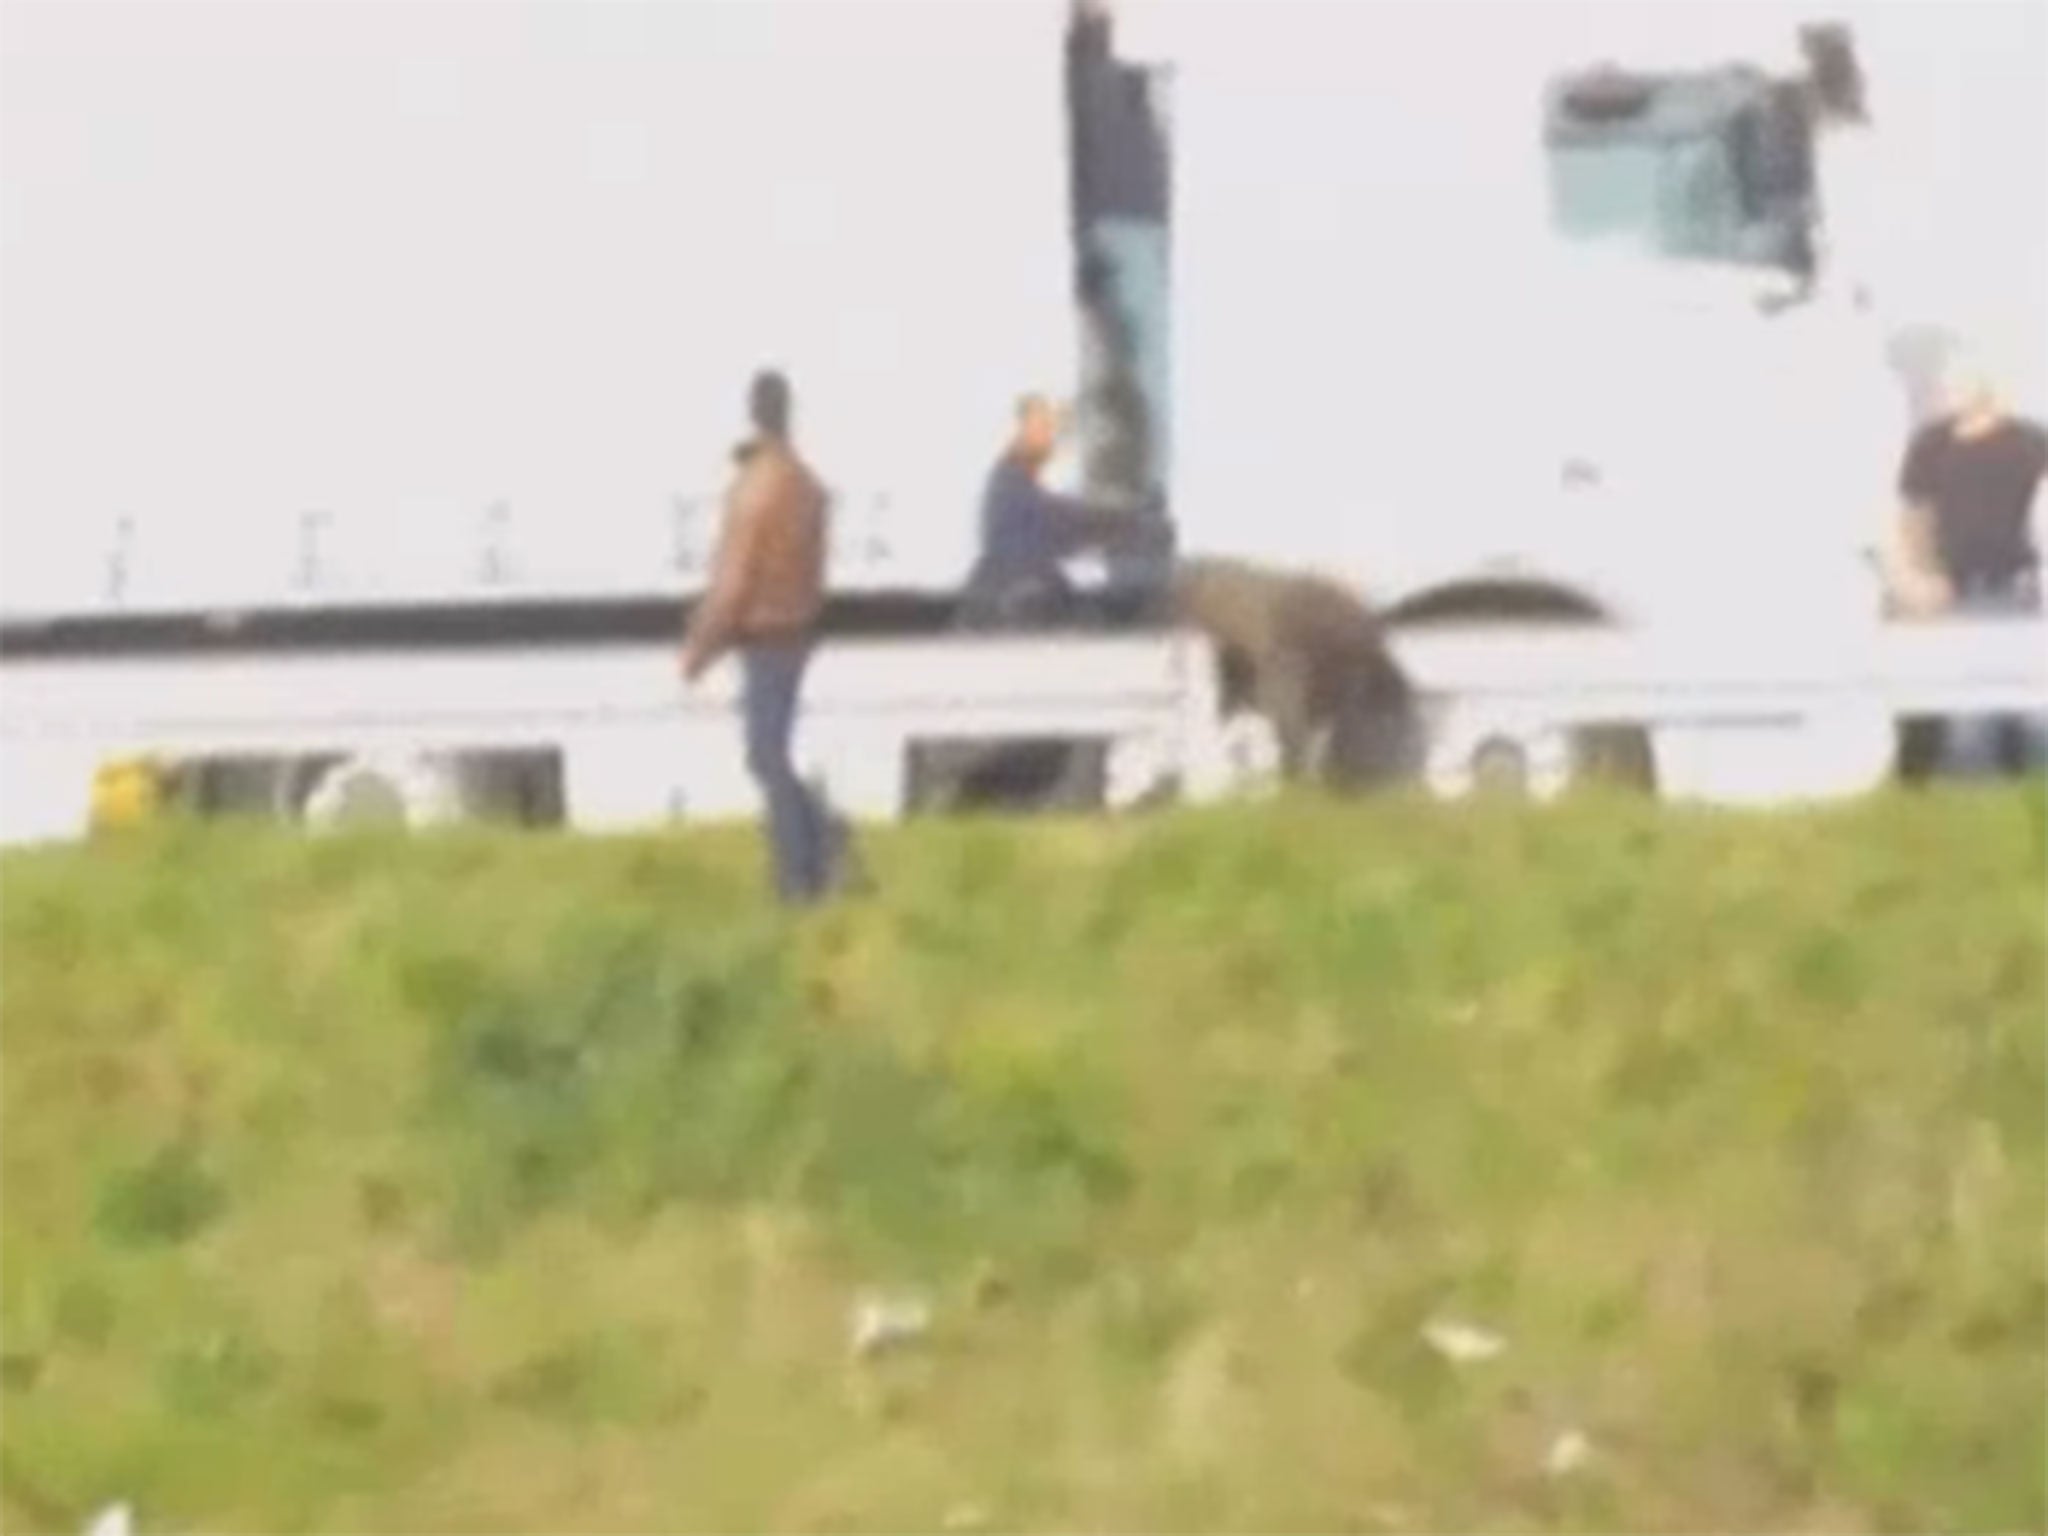 Police appearing to attack migrants in Calais